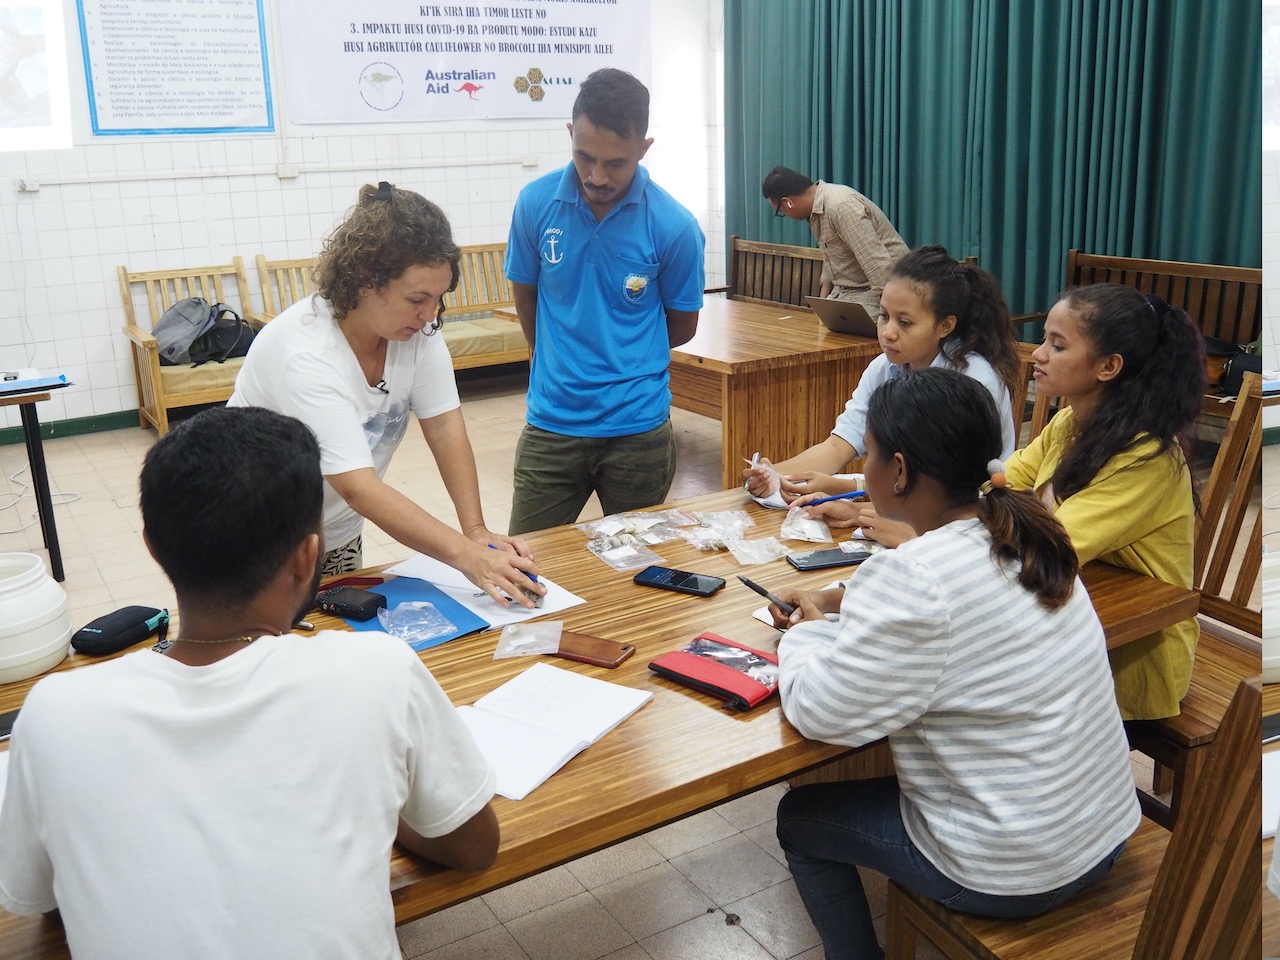 Dr. Ariadna Burgos leads a one-day workshop on marine invertebrates for six marine science students at the National University of Timor-Leste. Photo by Kate Bevitt.